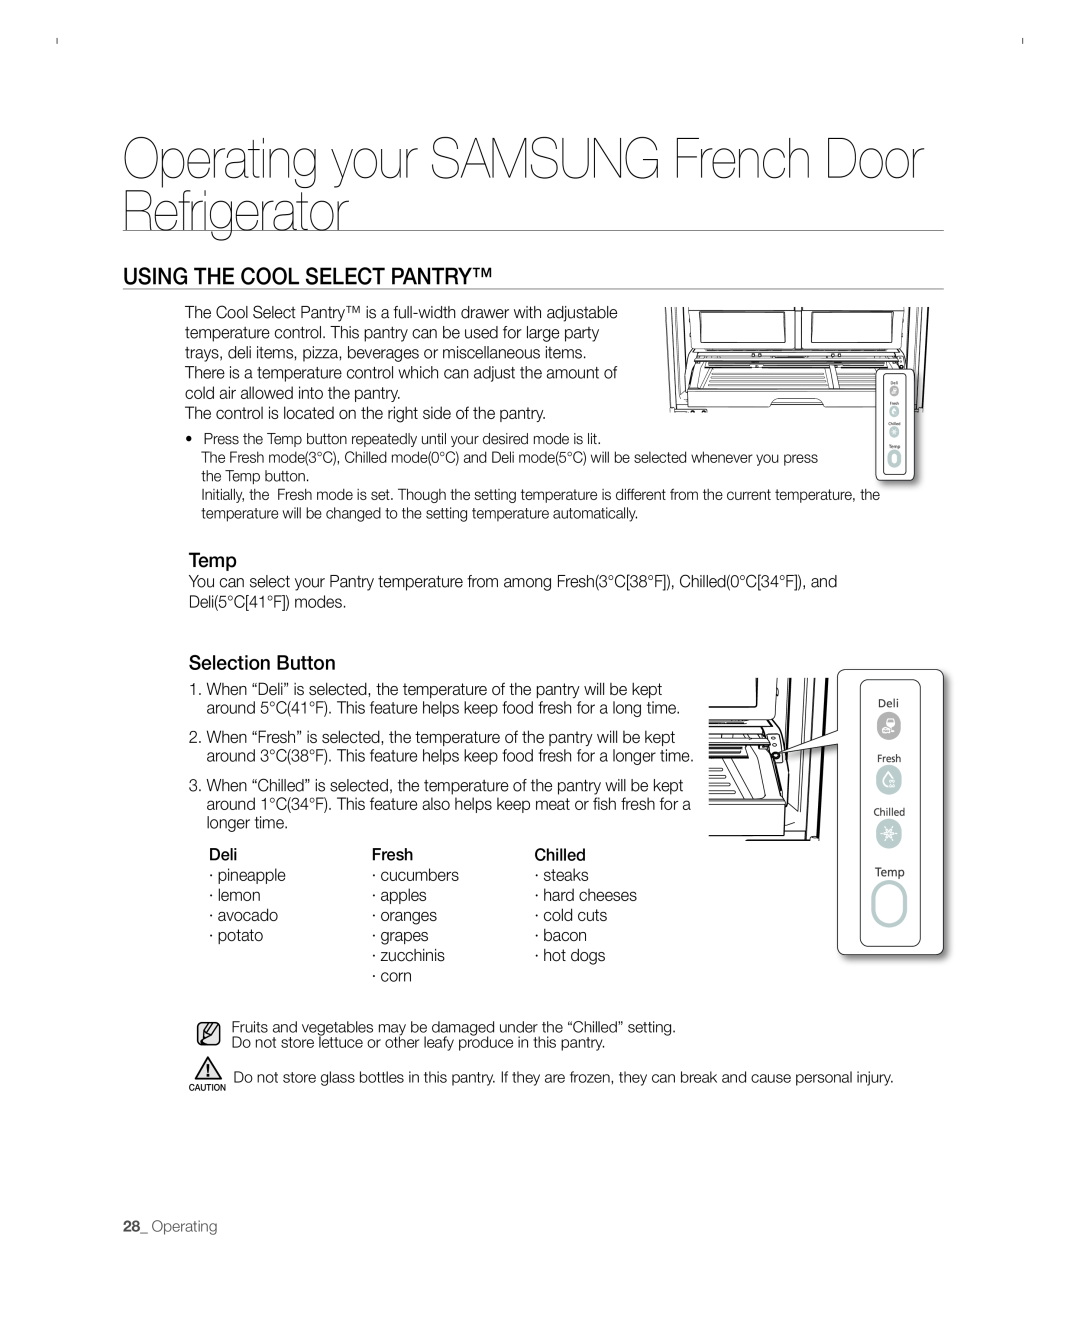 Samsung RFG297ACBP Using The Cool Select Pantry, Operating your SAMSUNG French Door Refrigerator, Temp, Selection Button 